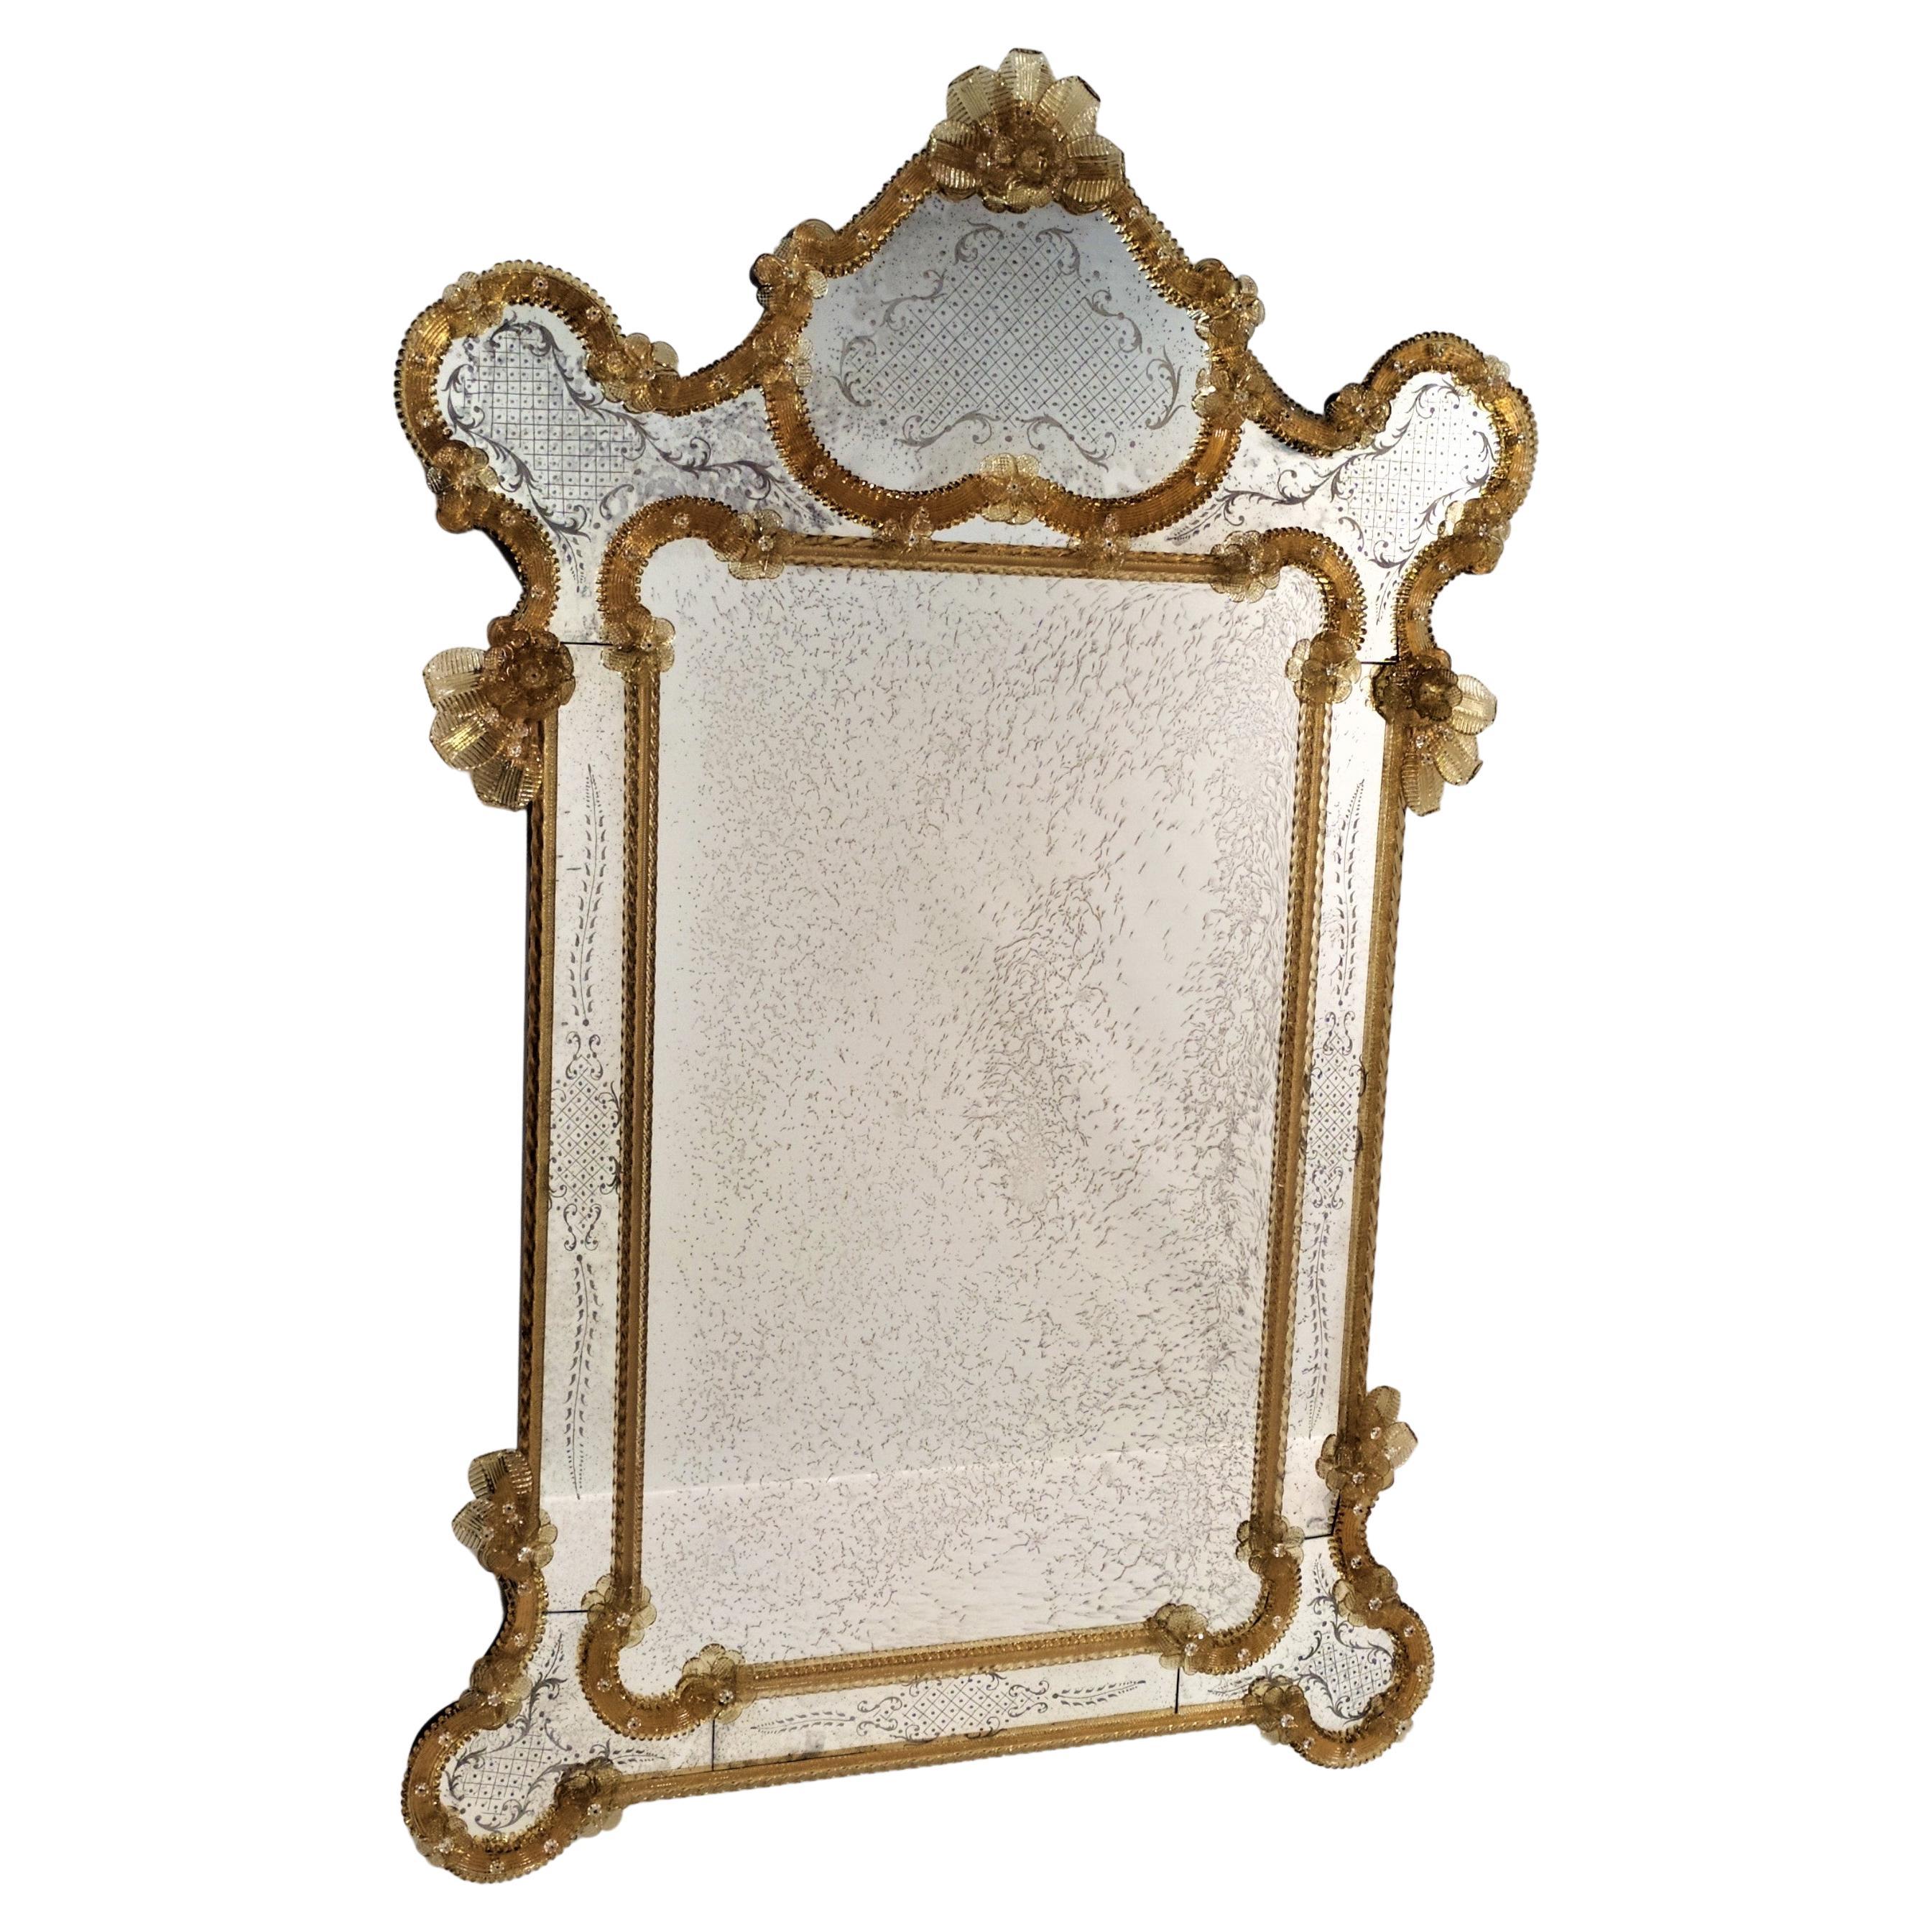 "Verona" Glass Mirror in Venetian Style by Fratelli Tosi, Made in Italy